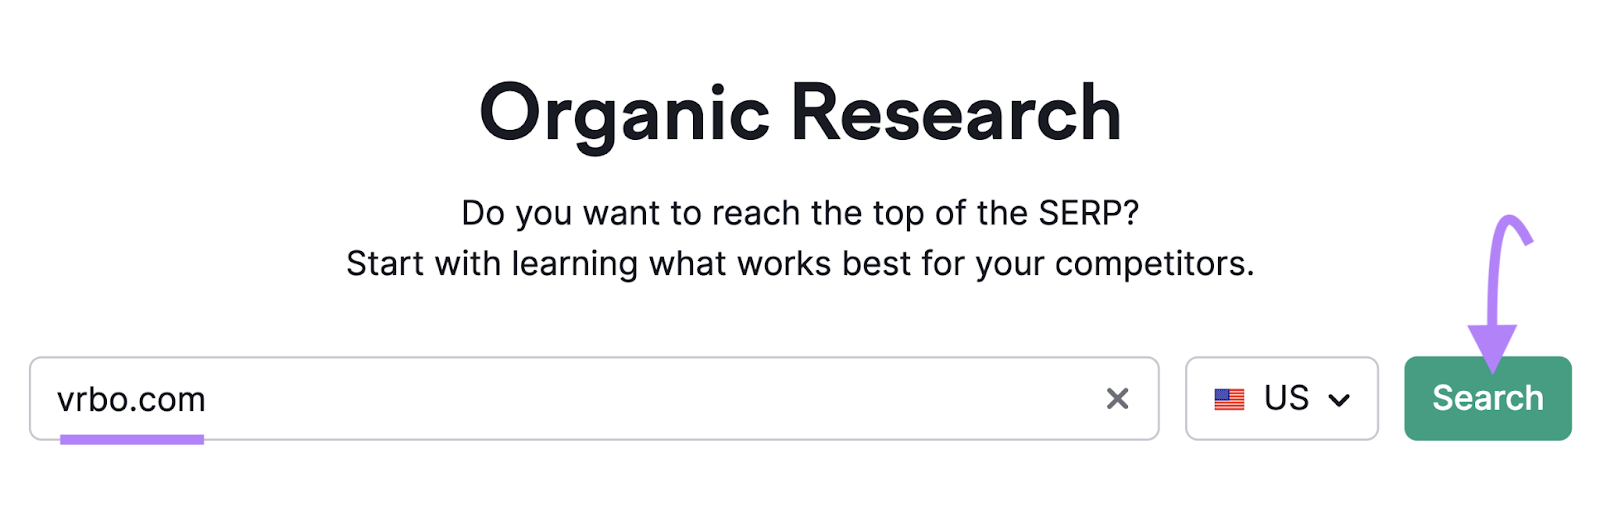 "vrbo.com" entered into the Organic Research tool search bar